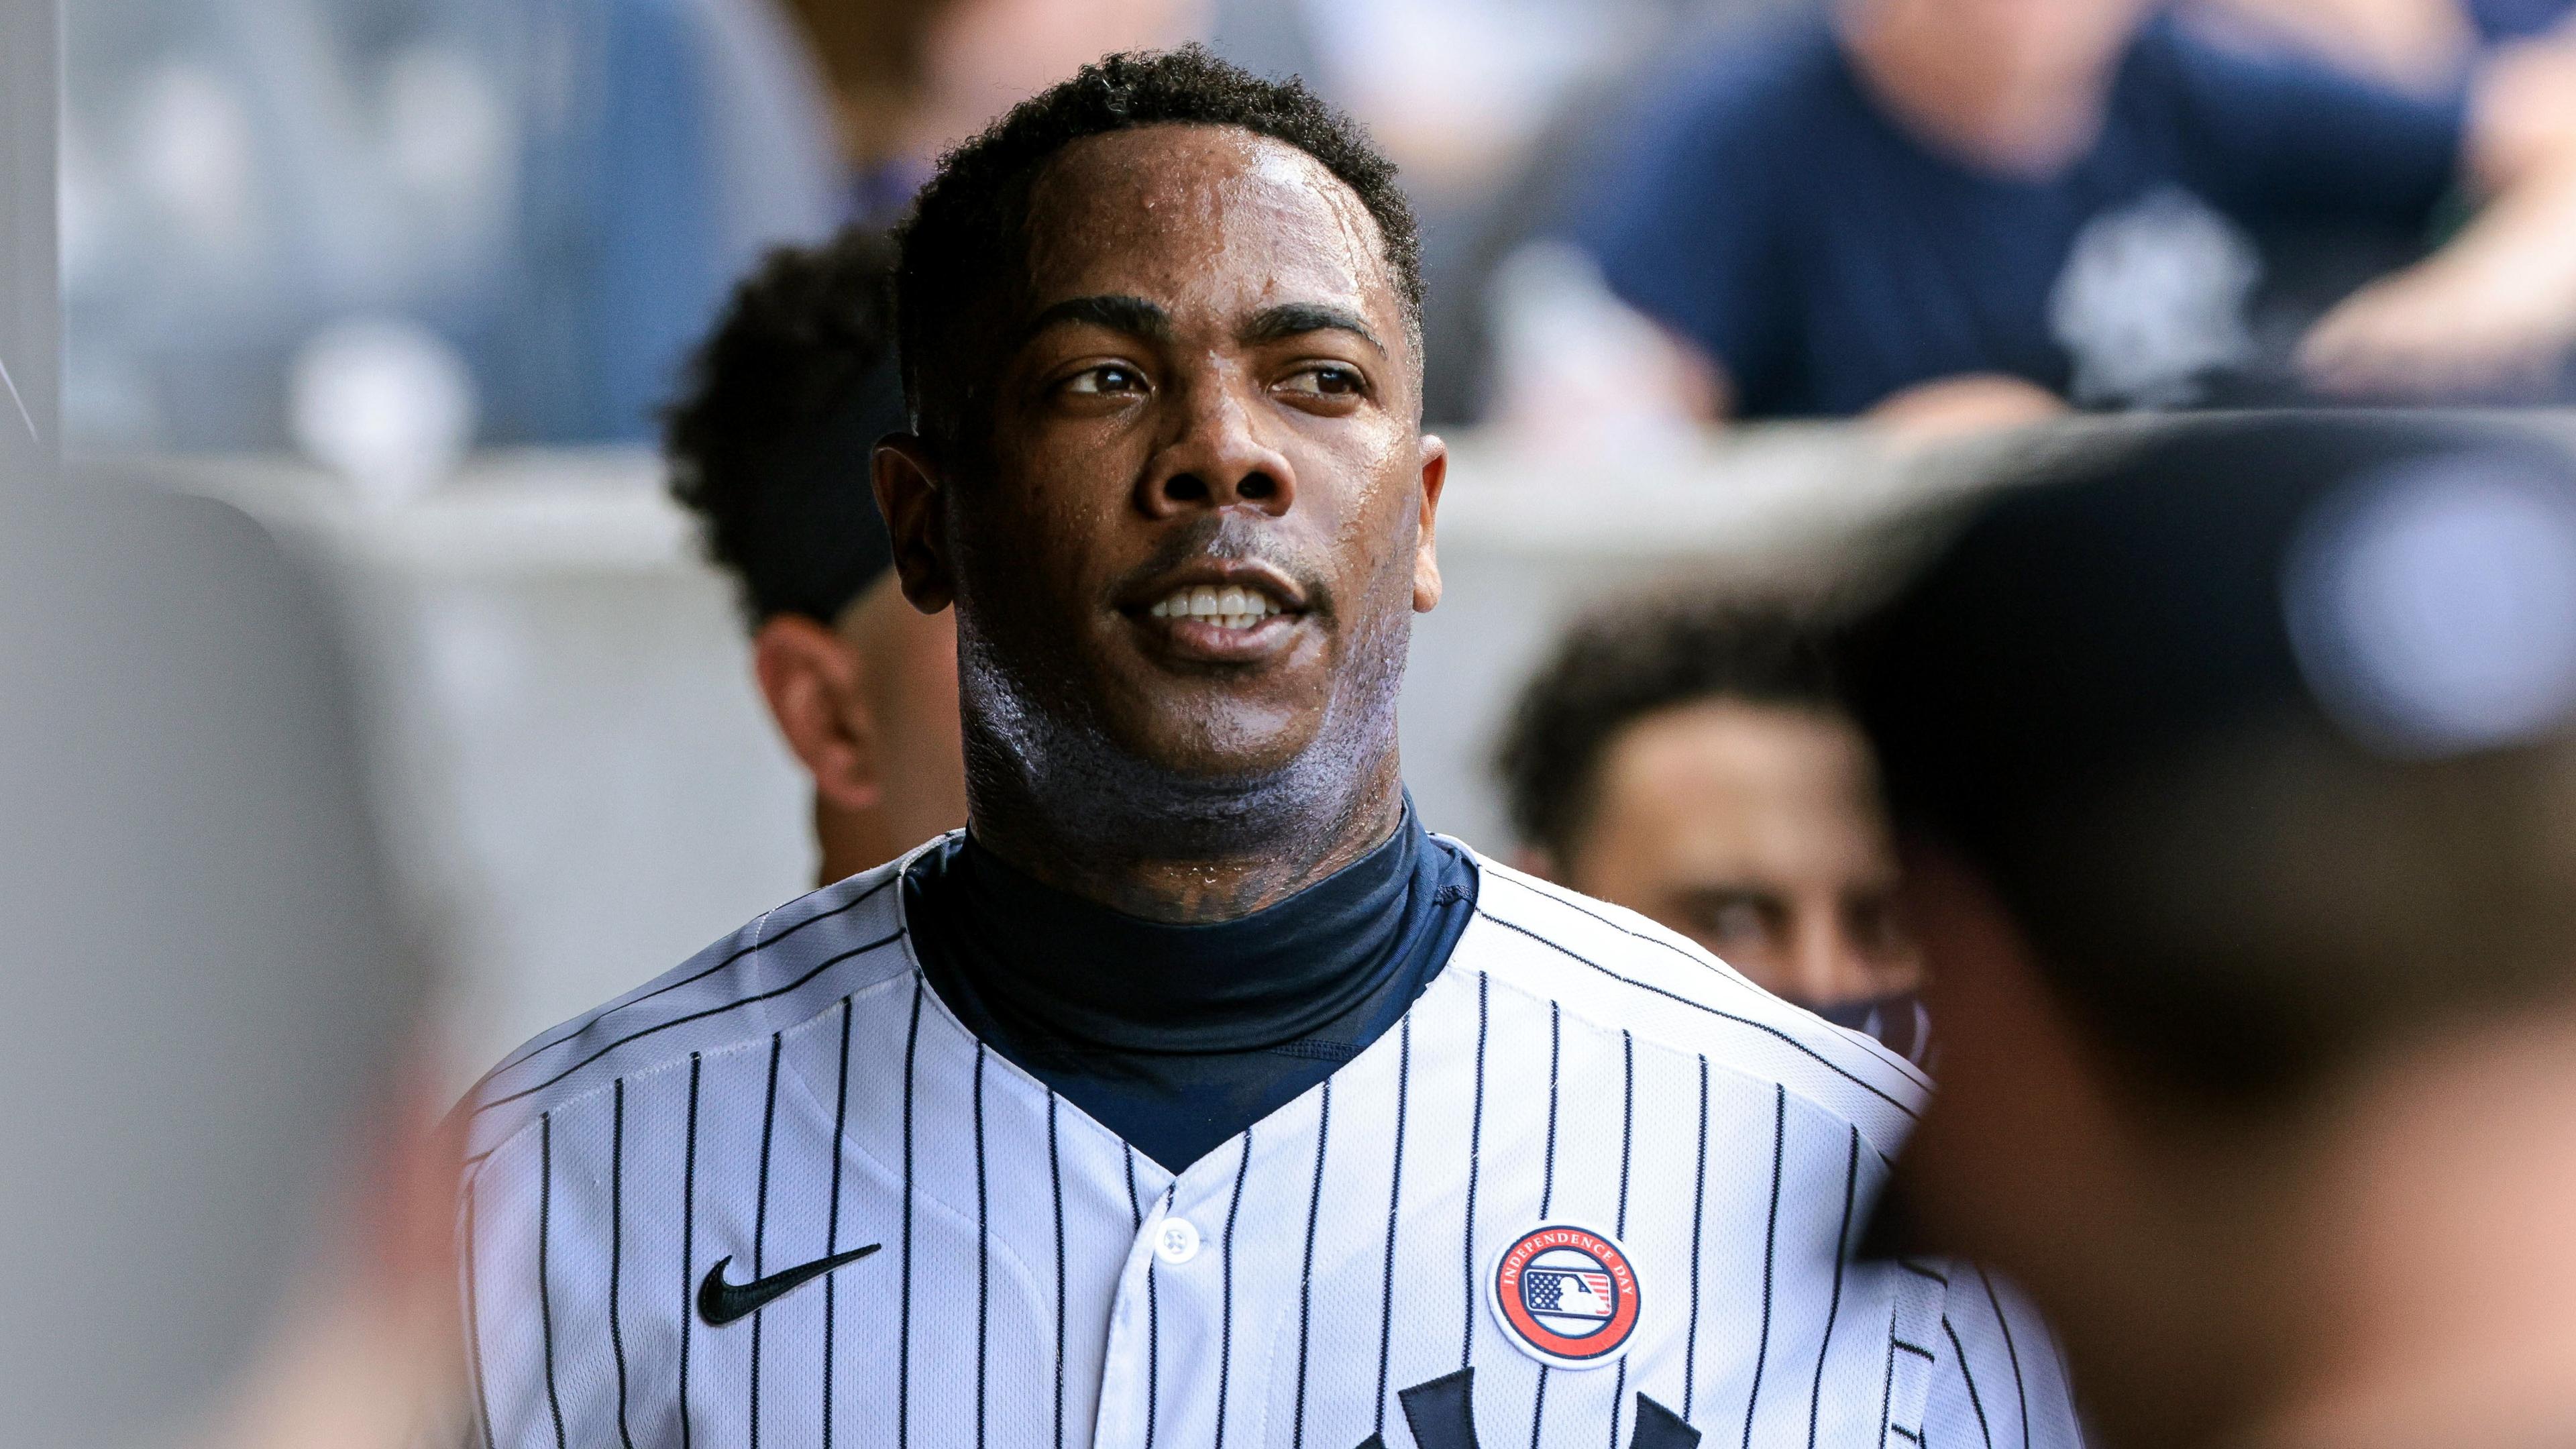 Jul 4, 2021; Bronx, New York, USA; New York Yankees relief pitcher Aroldis Chapman (54) reacts in the dugout after being relieved from the game during the seventh inning against the New York Mets at Yankee Stadium. Mandatory Credit: Vincent Carchietta-USA TODAY Sports / © Vincent Carchietta-USA TODAY Sports